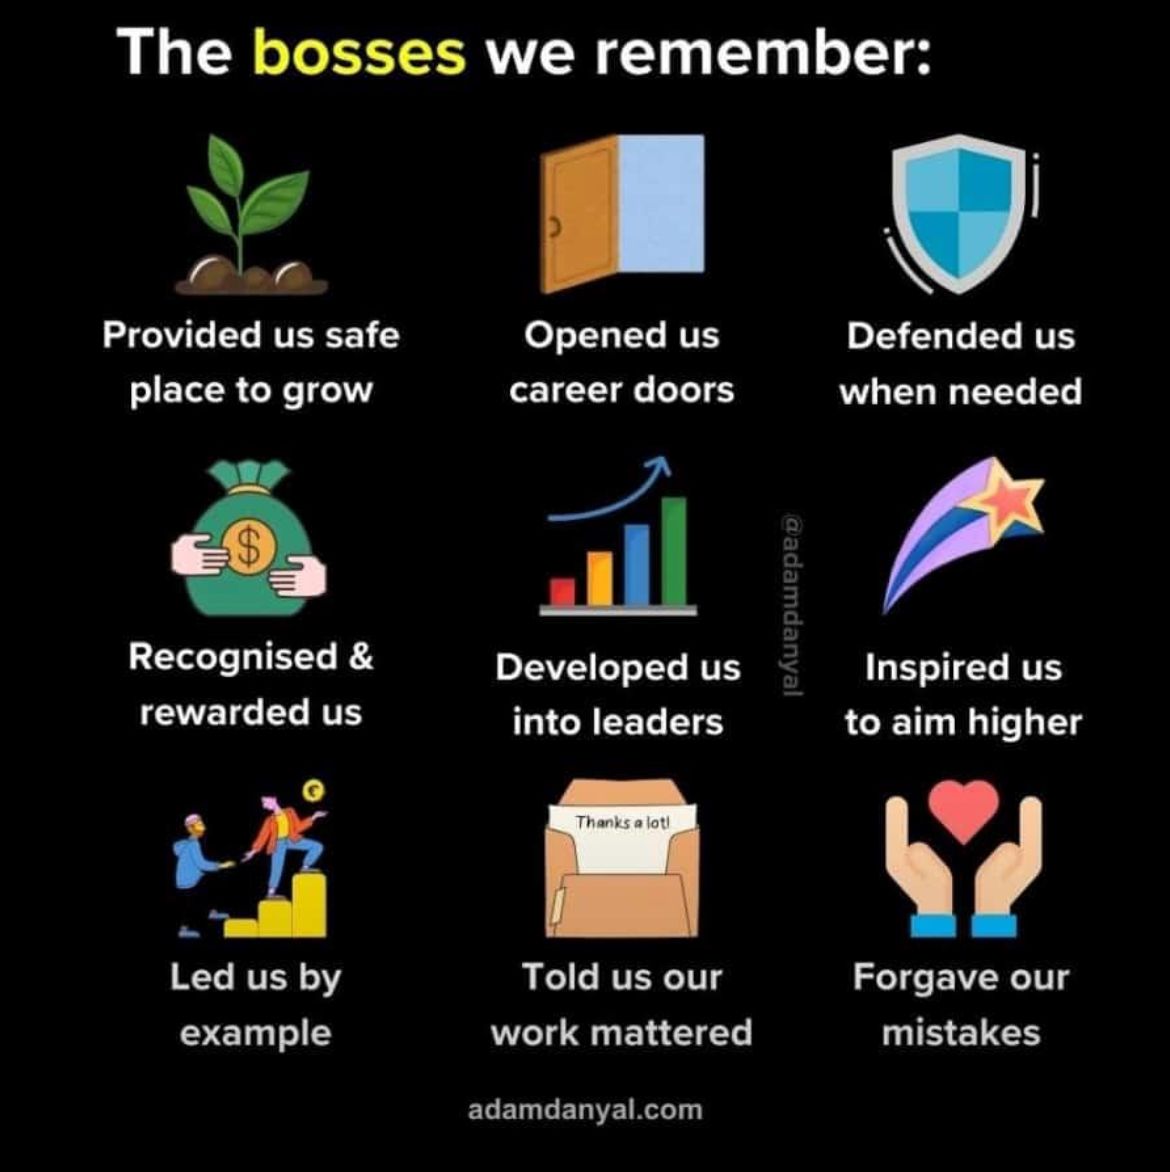 ↔️ How many bad bosses did you have in your career? I had 3. ↔️ See 9 types of bosses we remember. ↔️ We remember bad bosses too. Do you agree?